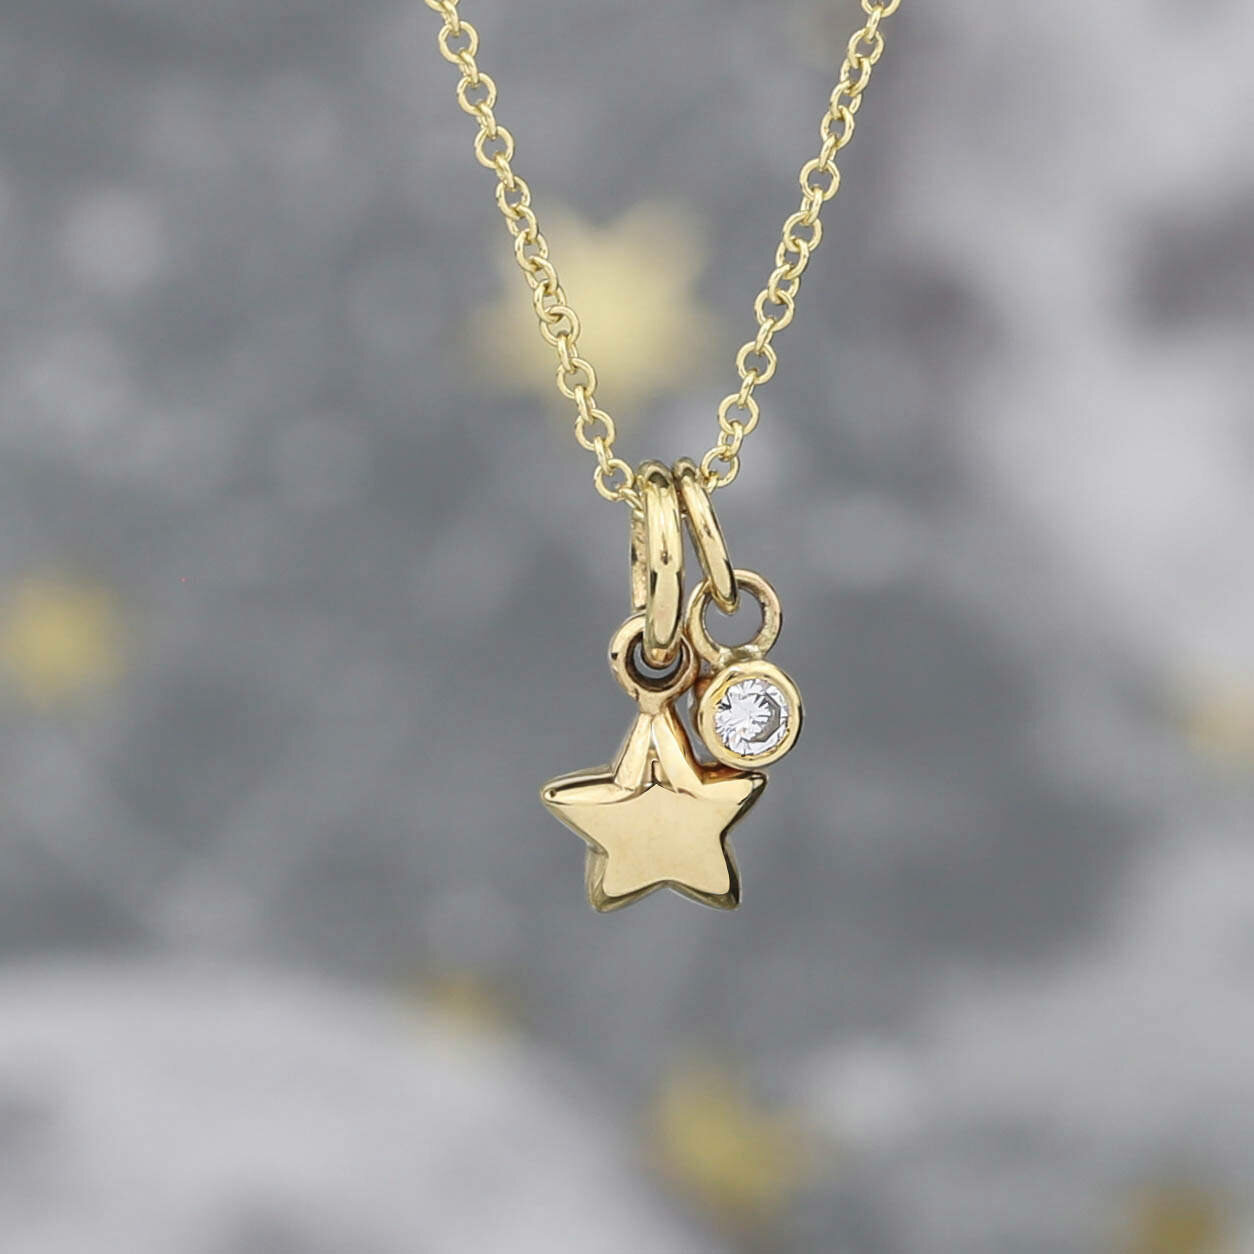 9ct Gold Falling Star Necklace | Anne-Michelle